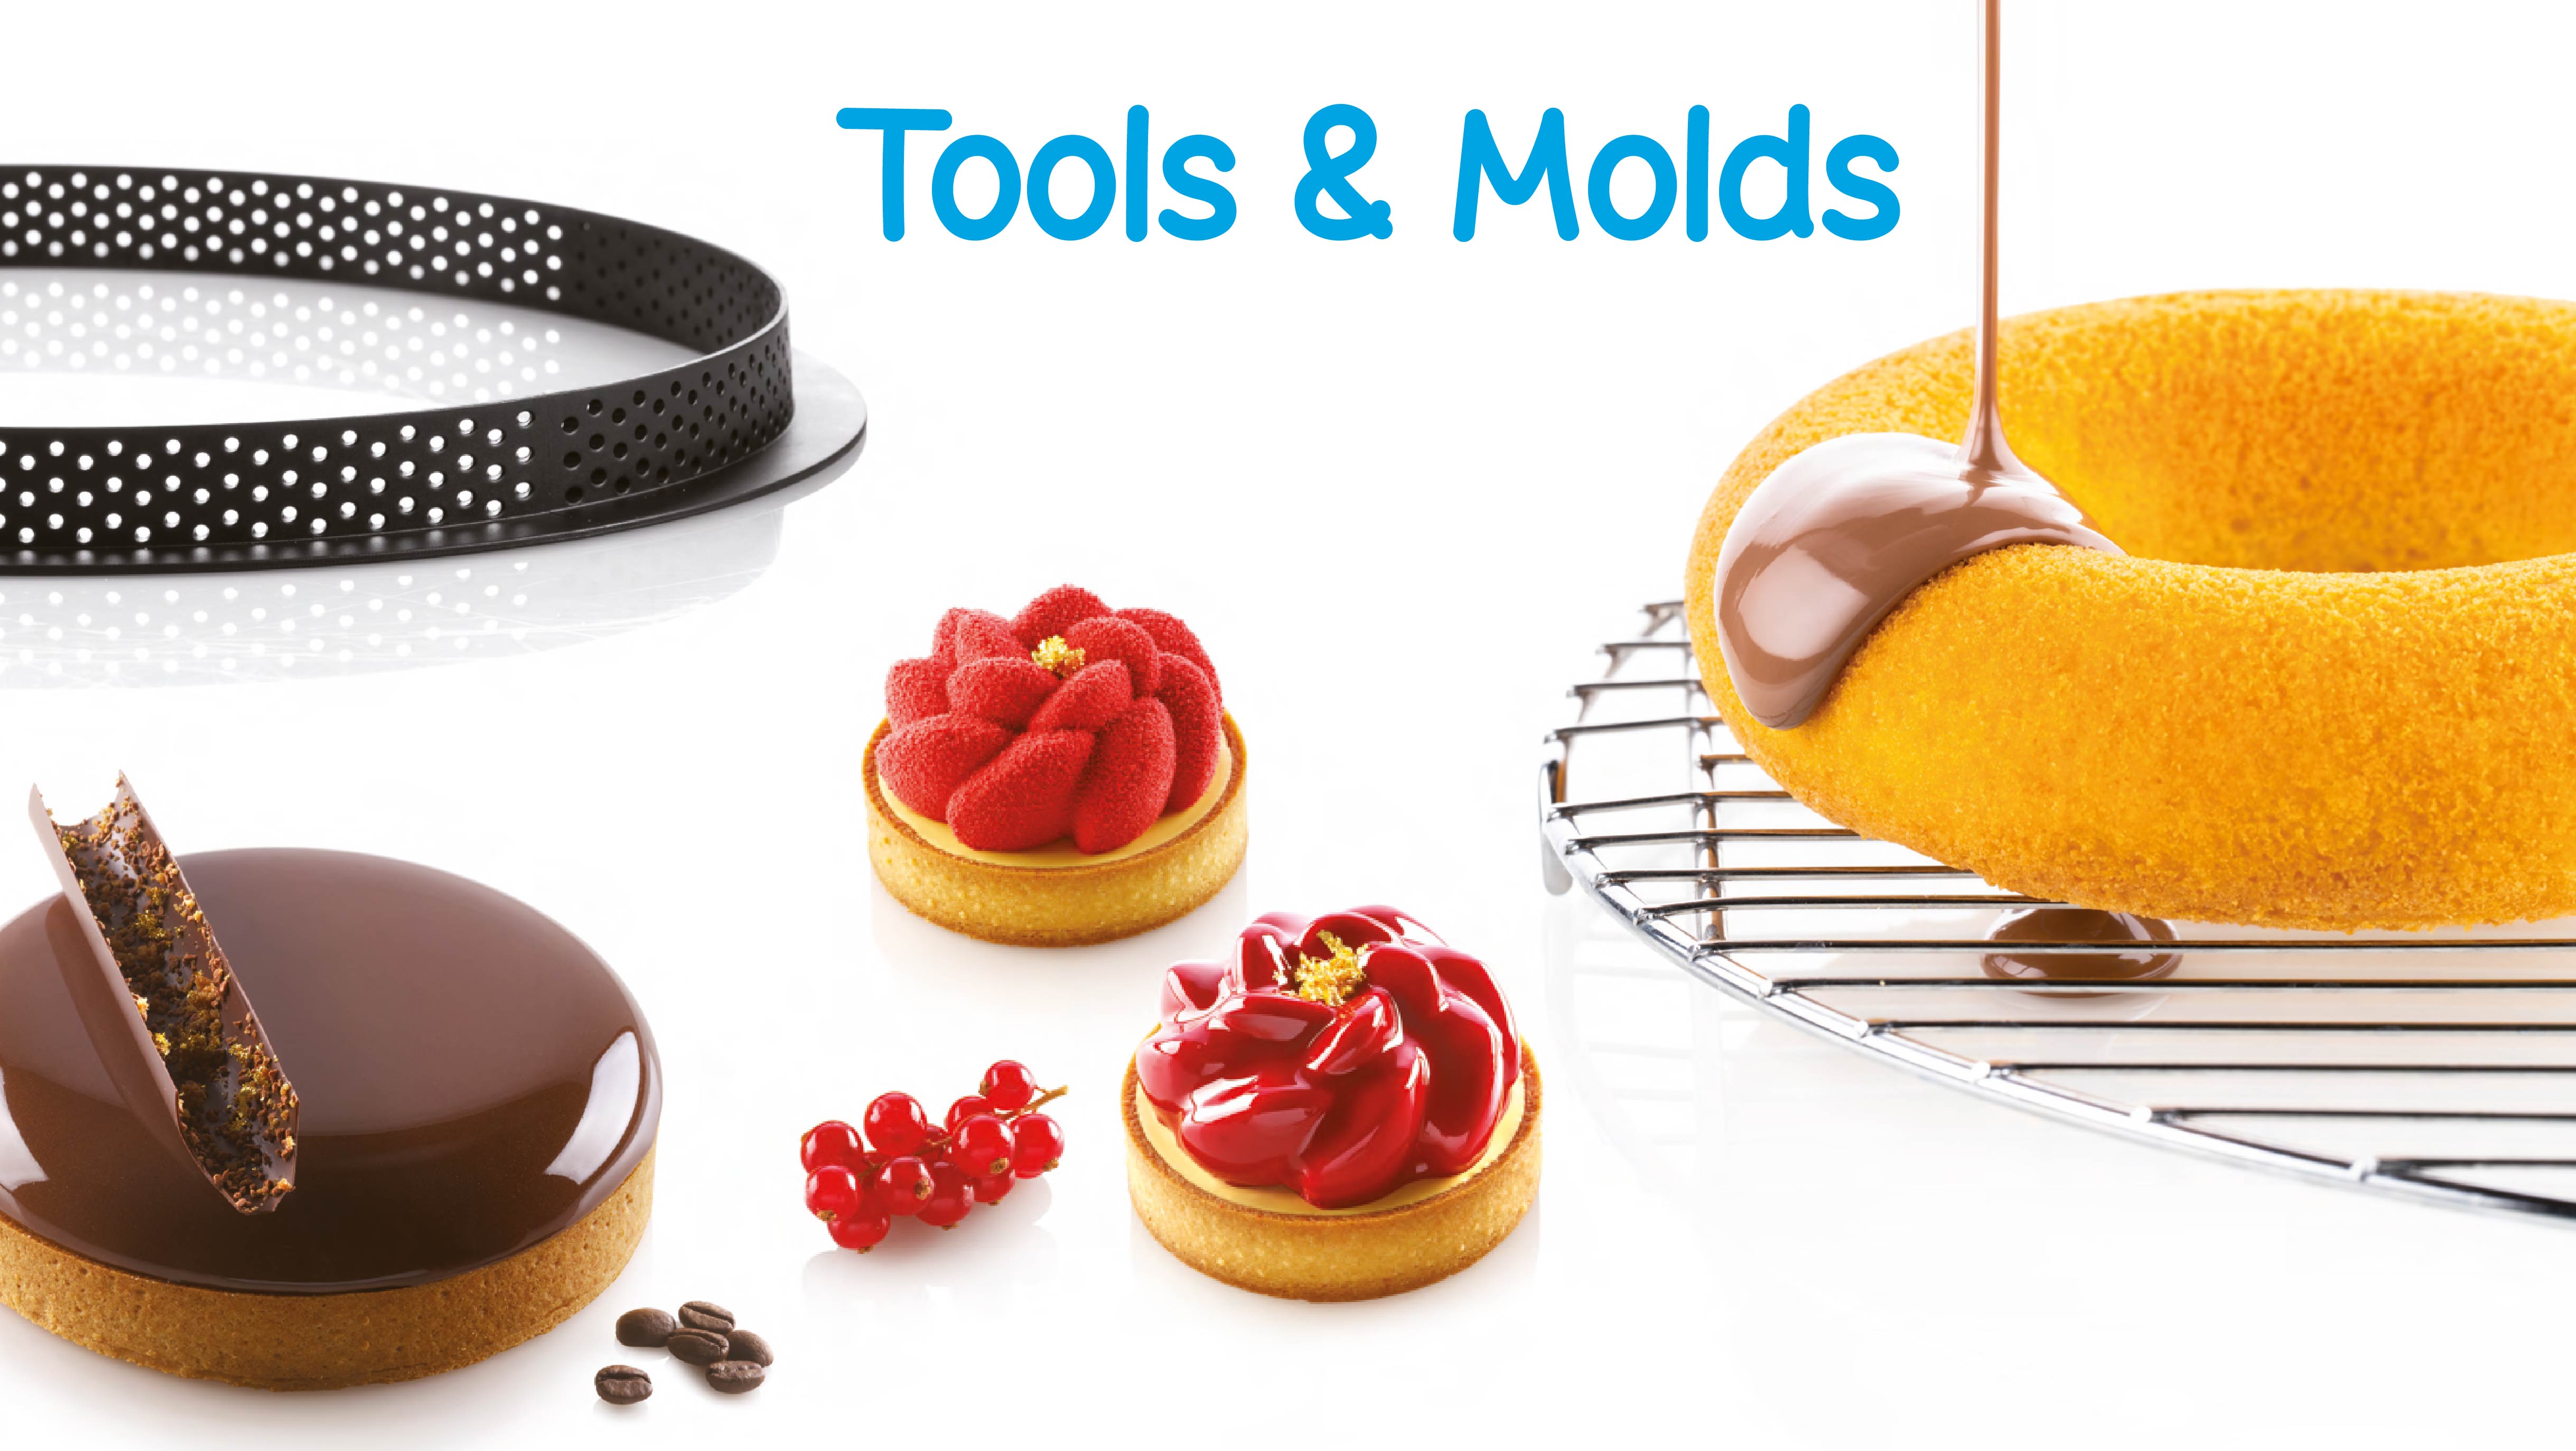 Tools & Molds